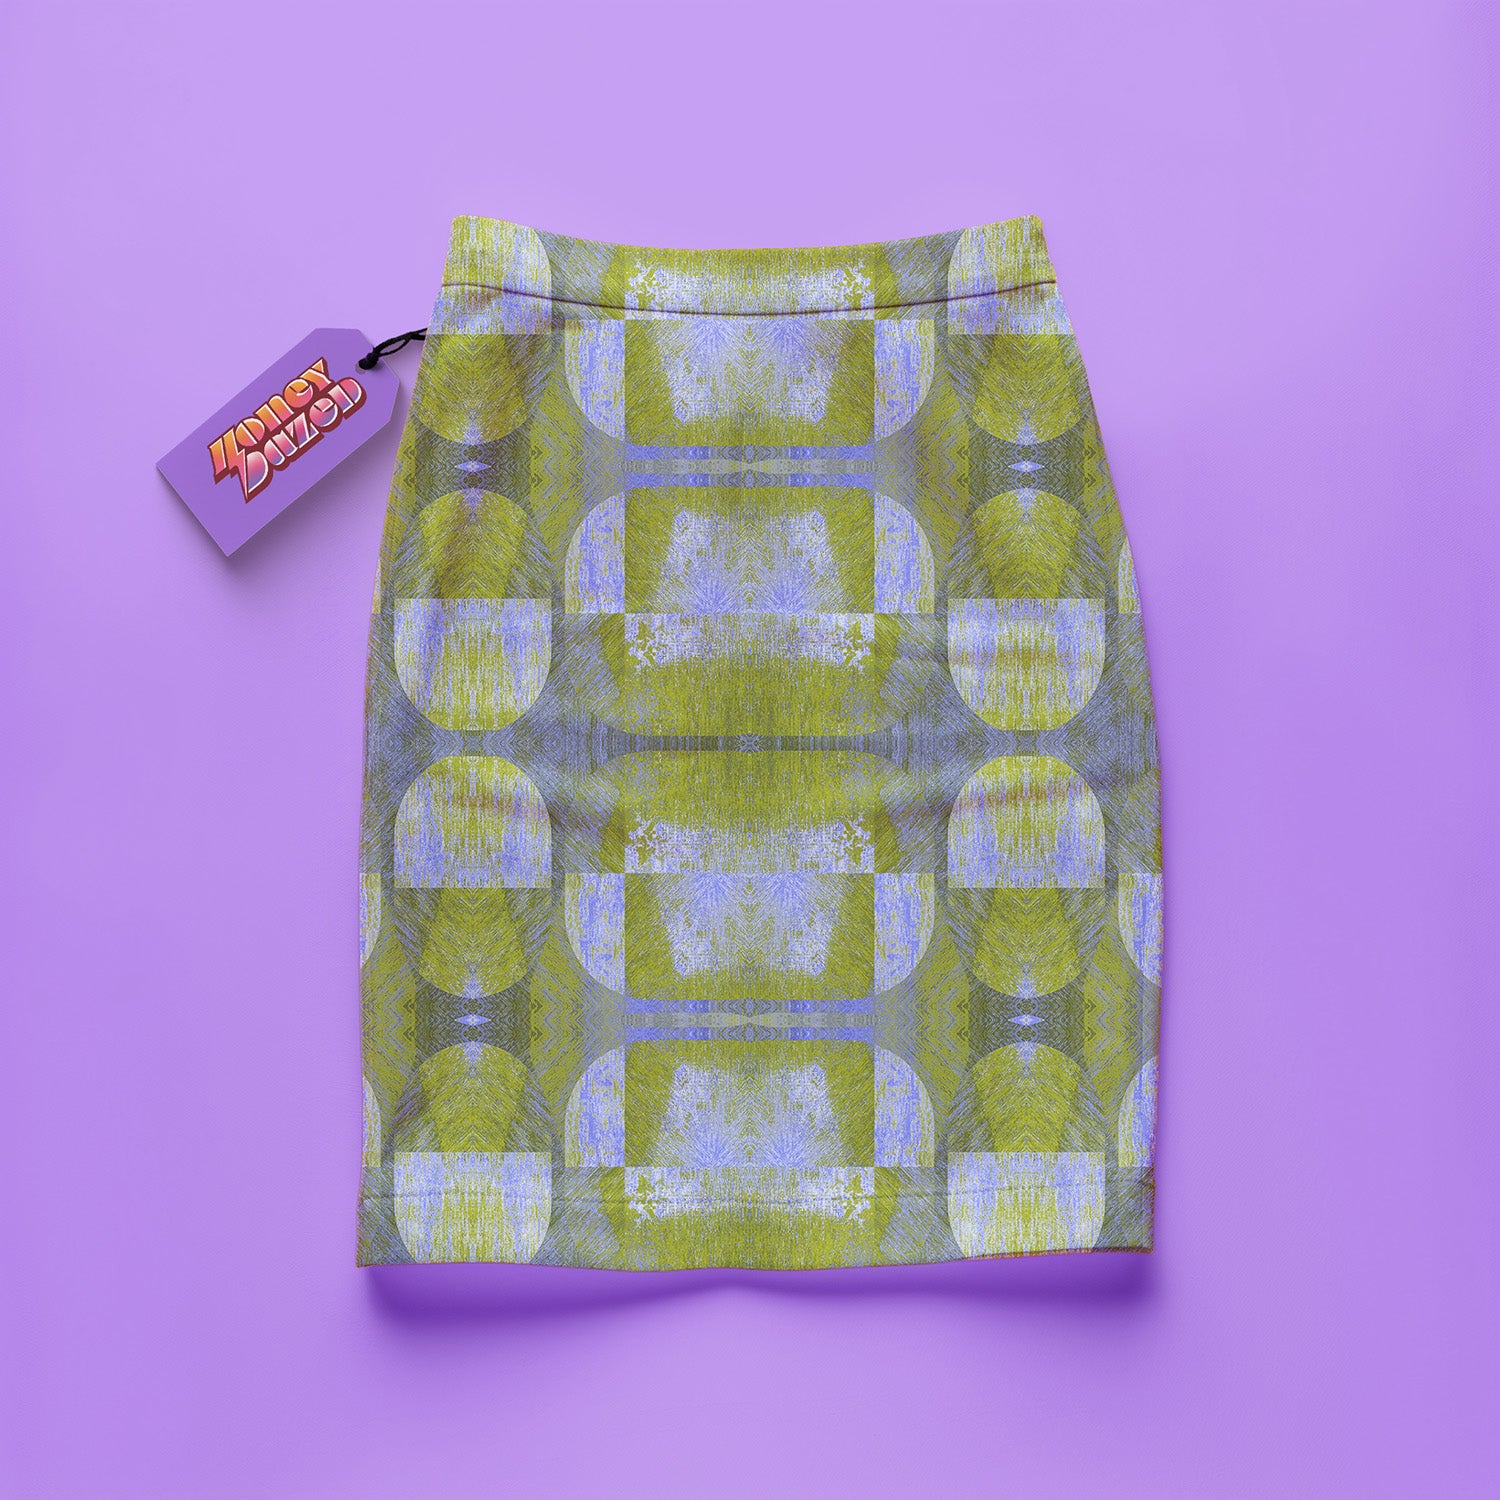 a purple and green skirt with a purple tag on it